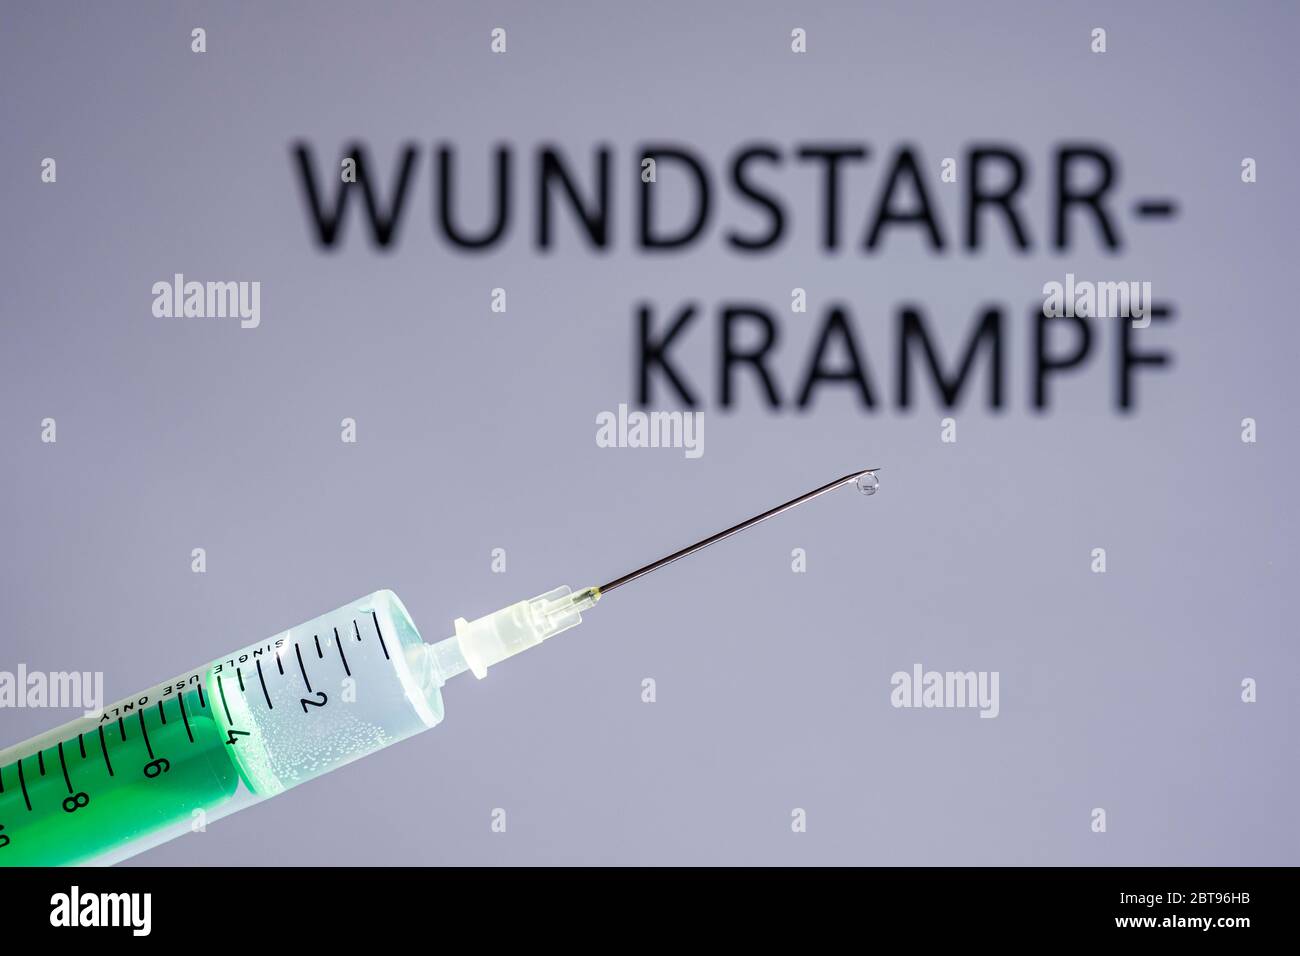 This photo illustration shows a disposable syringe with hypodermic needle, WUNDSTARRKRAMPF written on a grey board behind Stock Photo